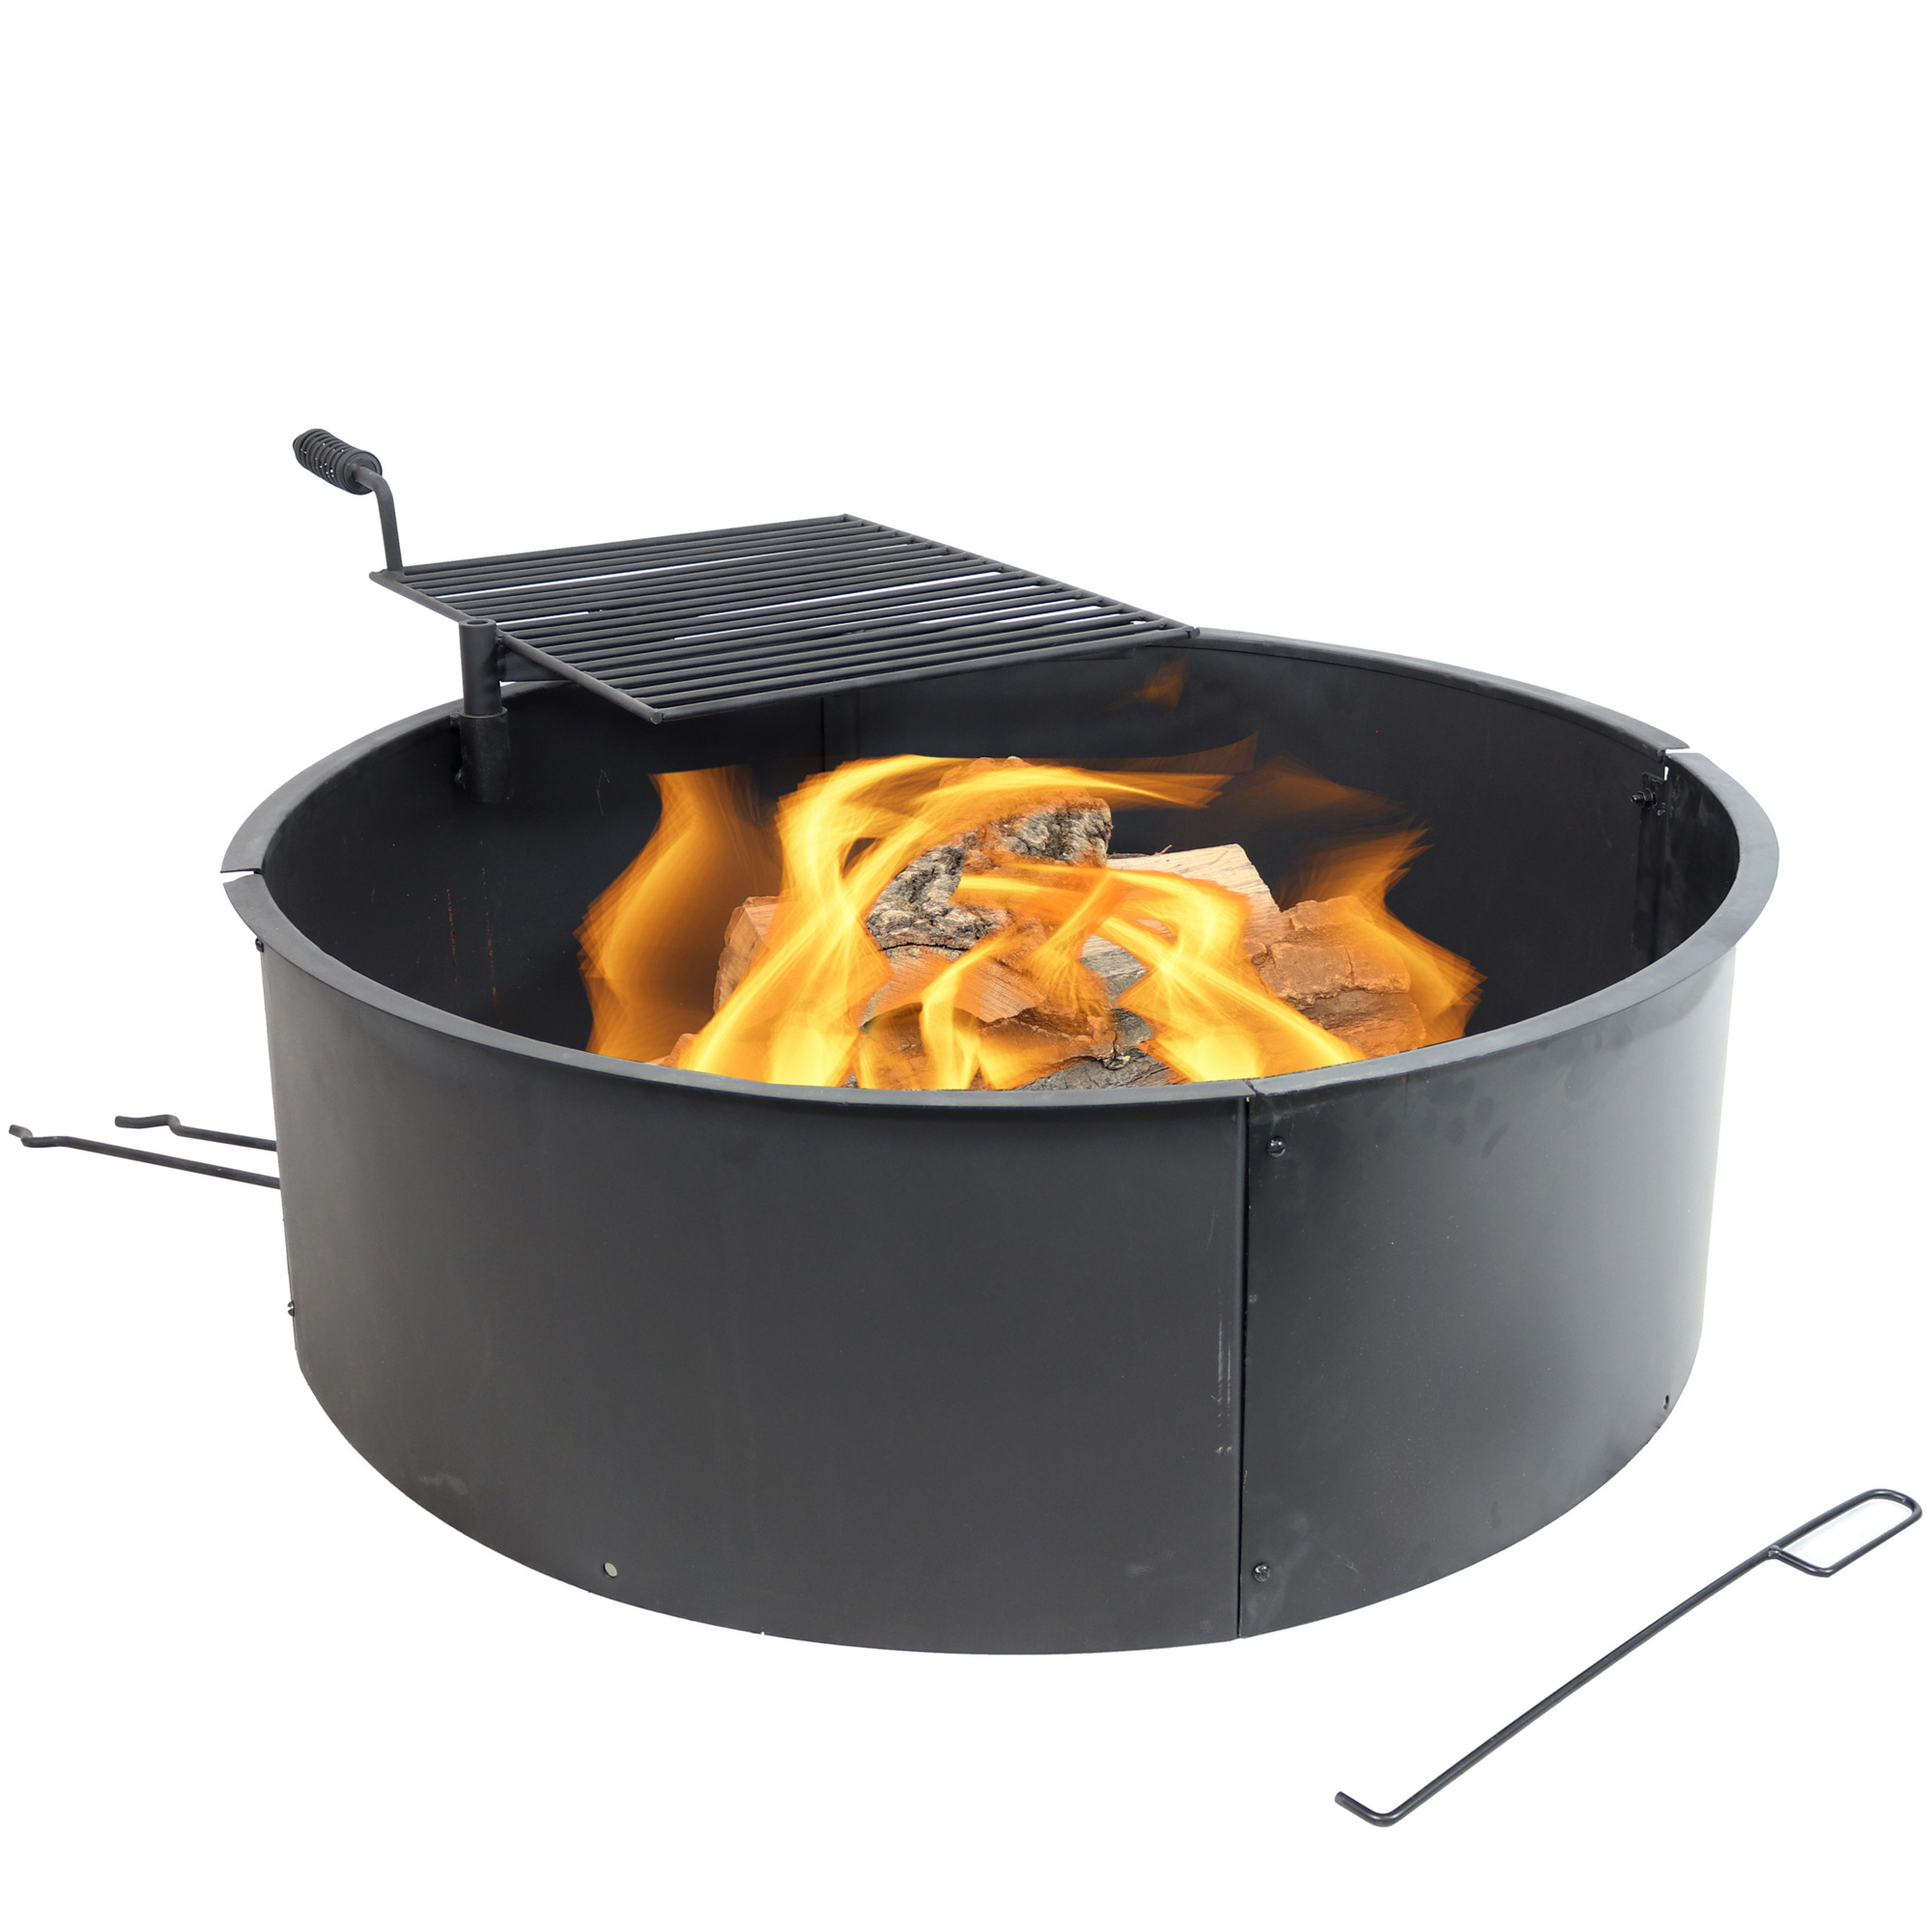 Sunnydaze Decor, Campfire Ring with Rotating Cooking Grate - 34in